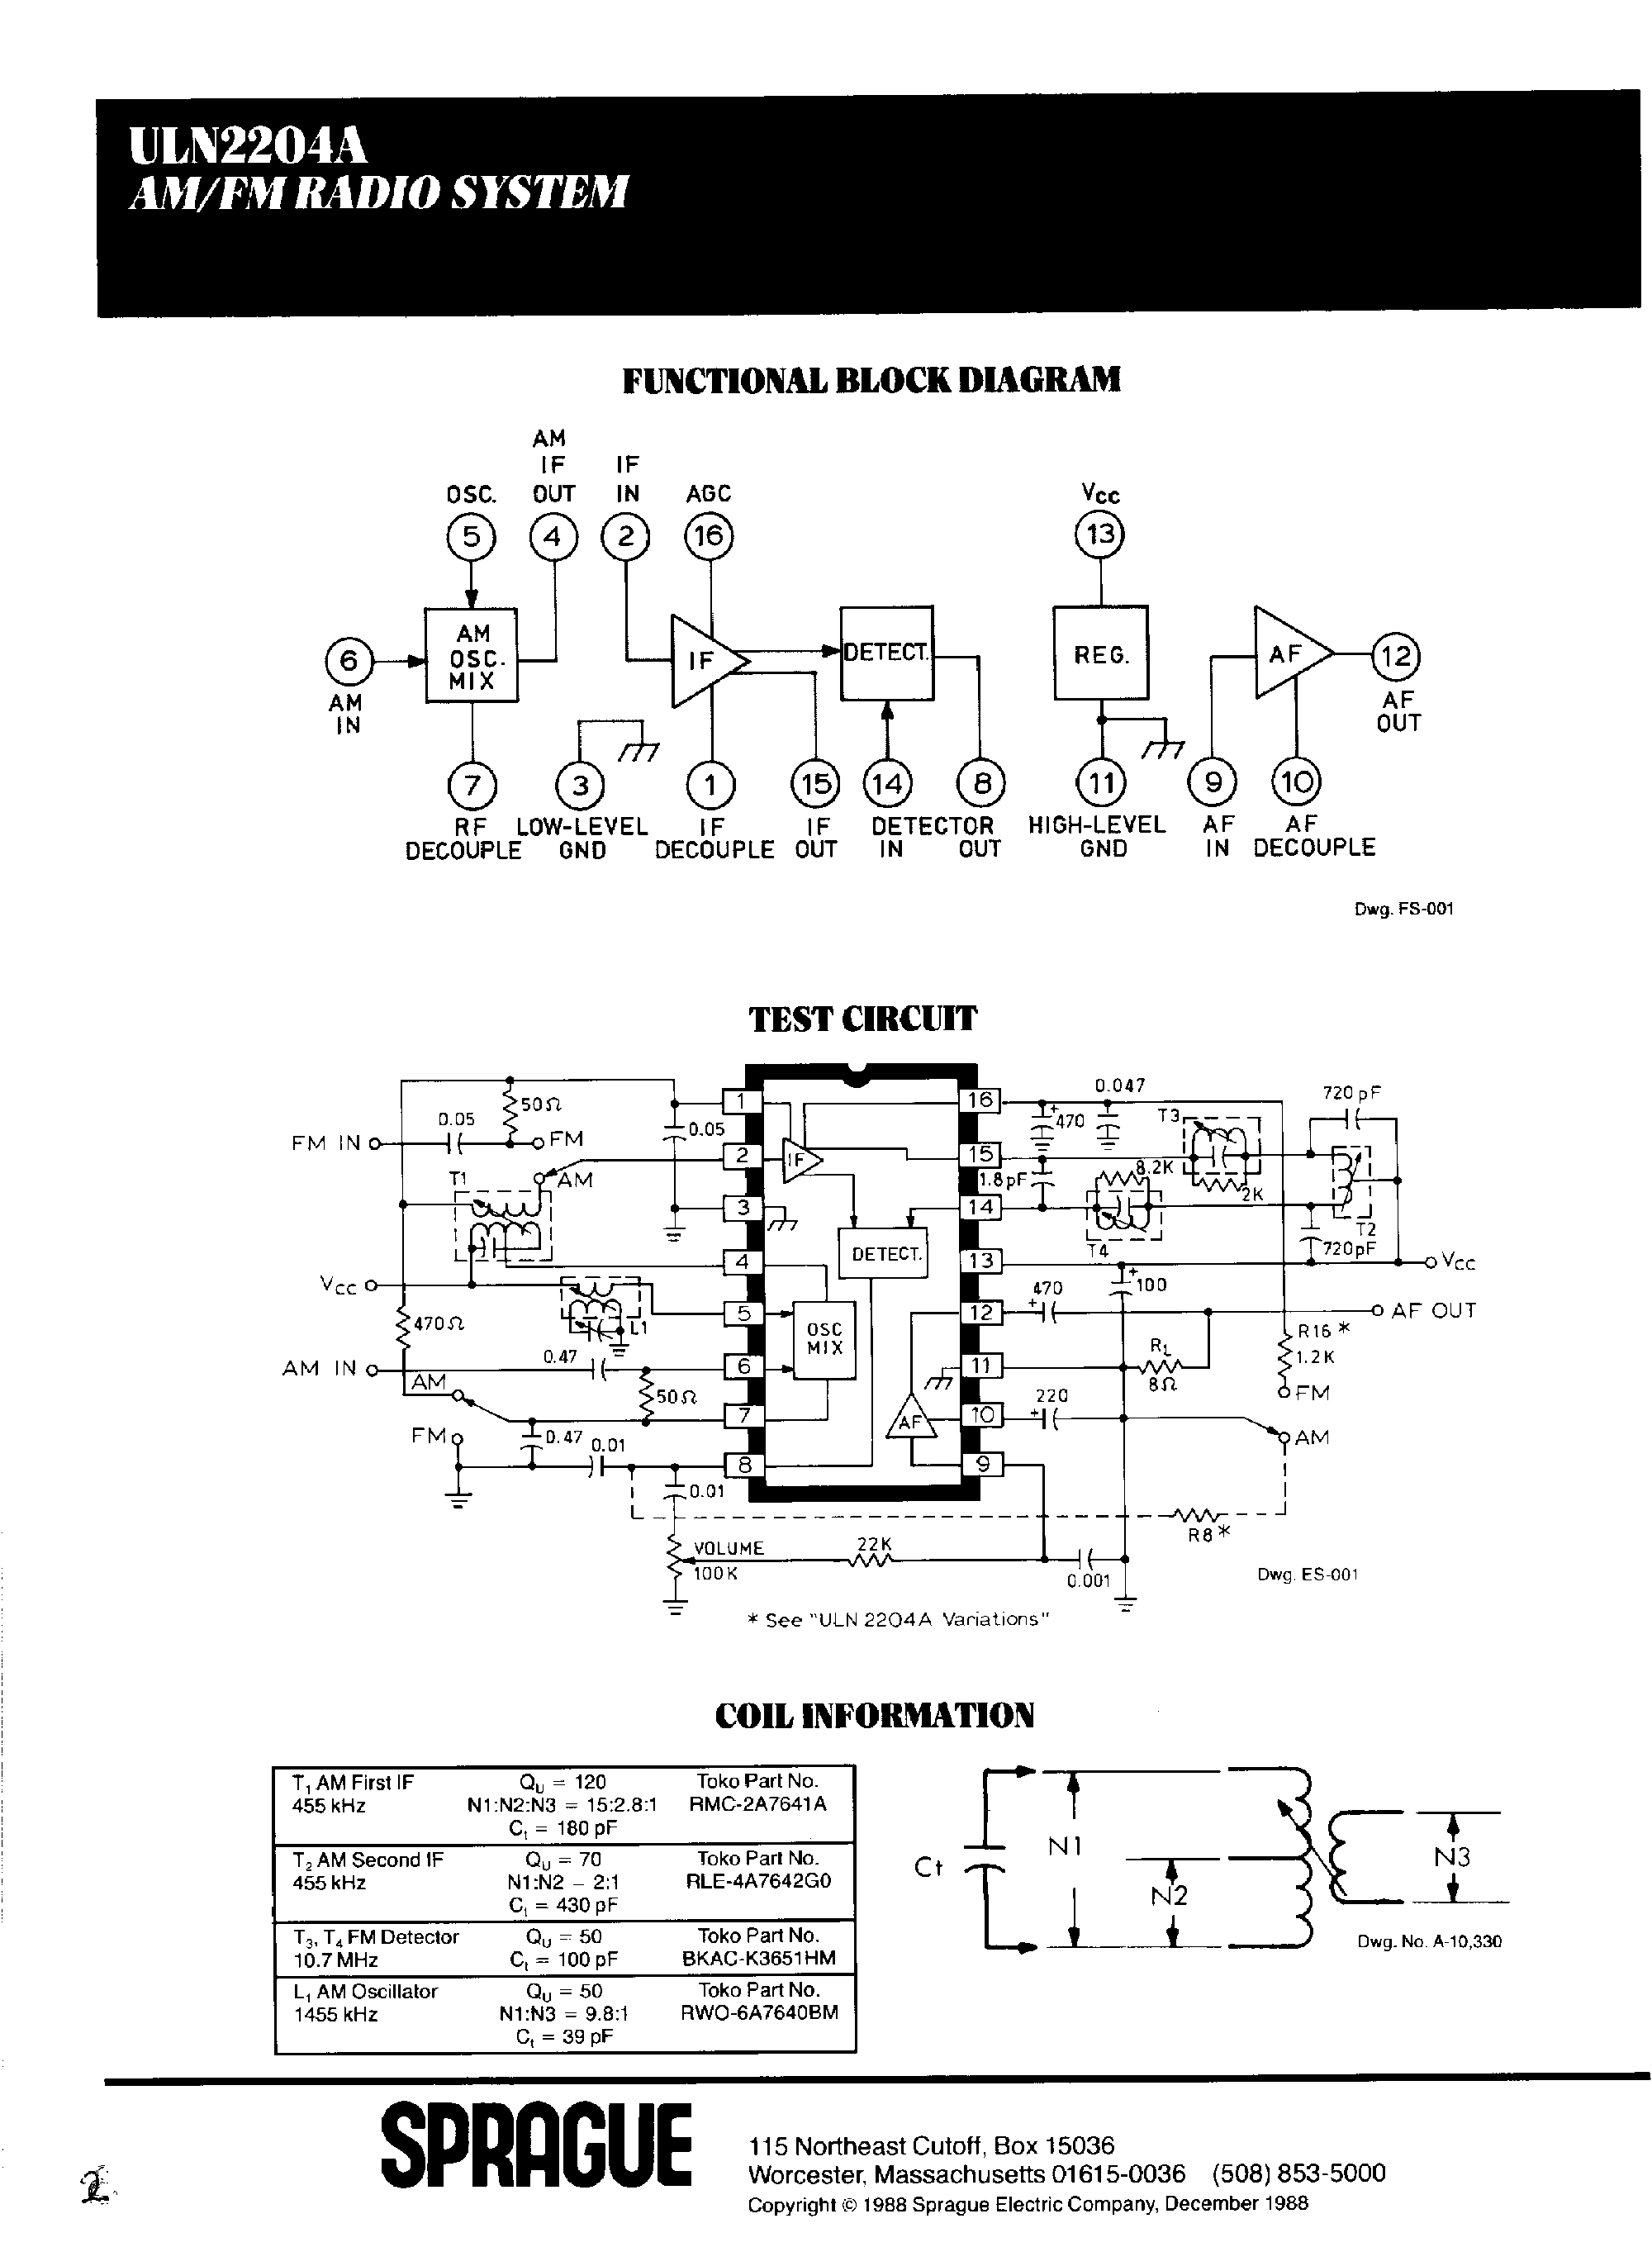 Datasheet ULN2204A - IF-Tuning-Signal Processing Circuit - 1.40 - 1.75V AM/2.20 - 2.65V FM out page 2